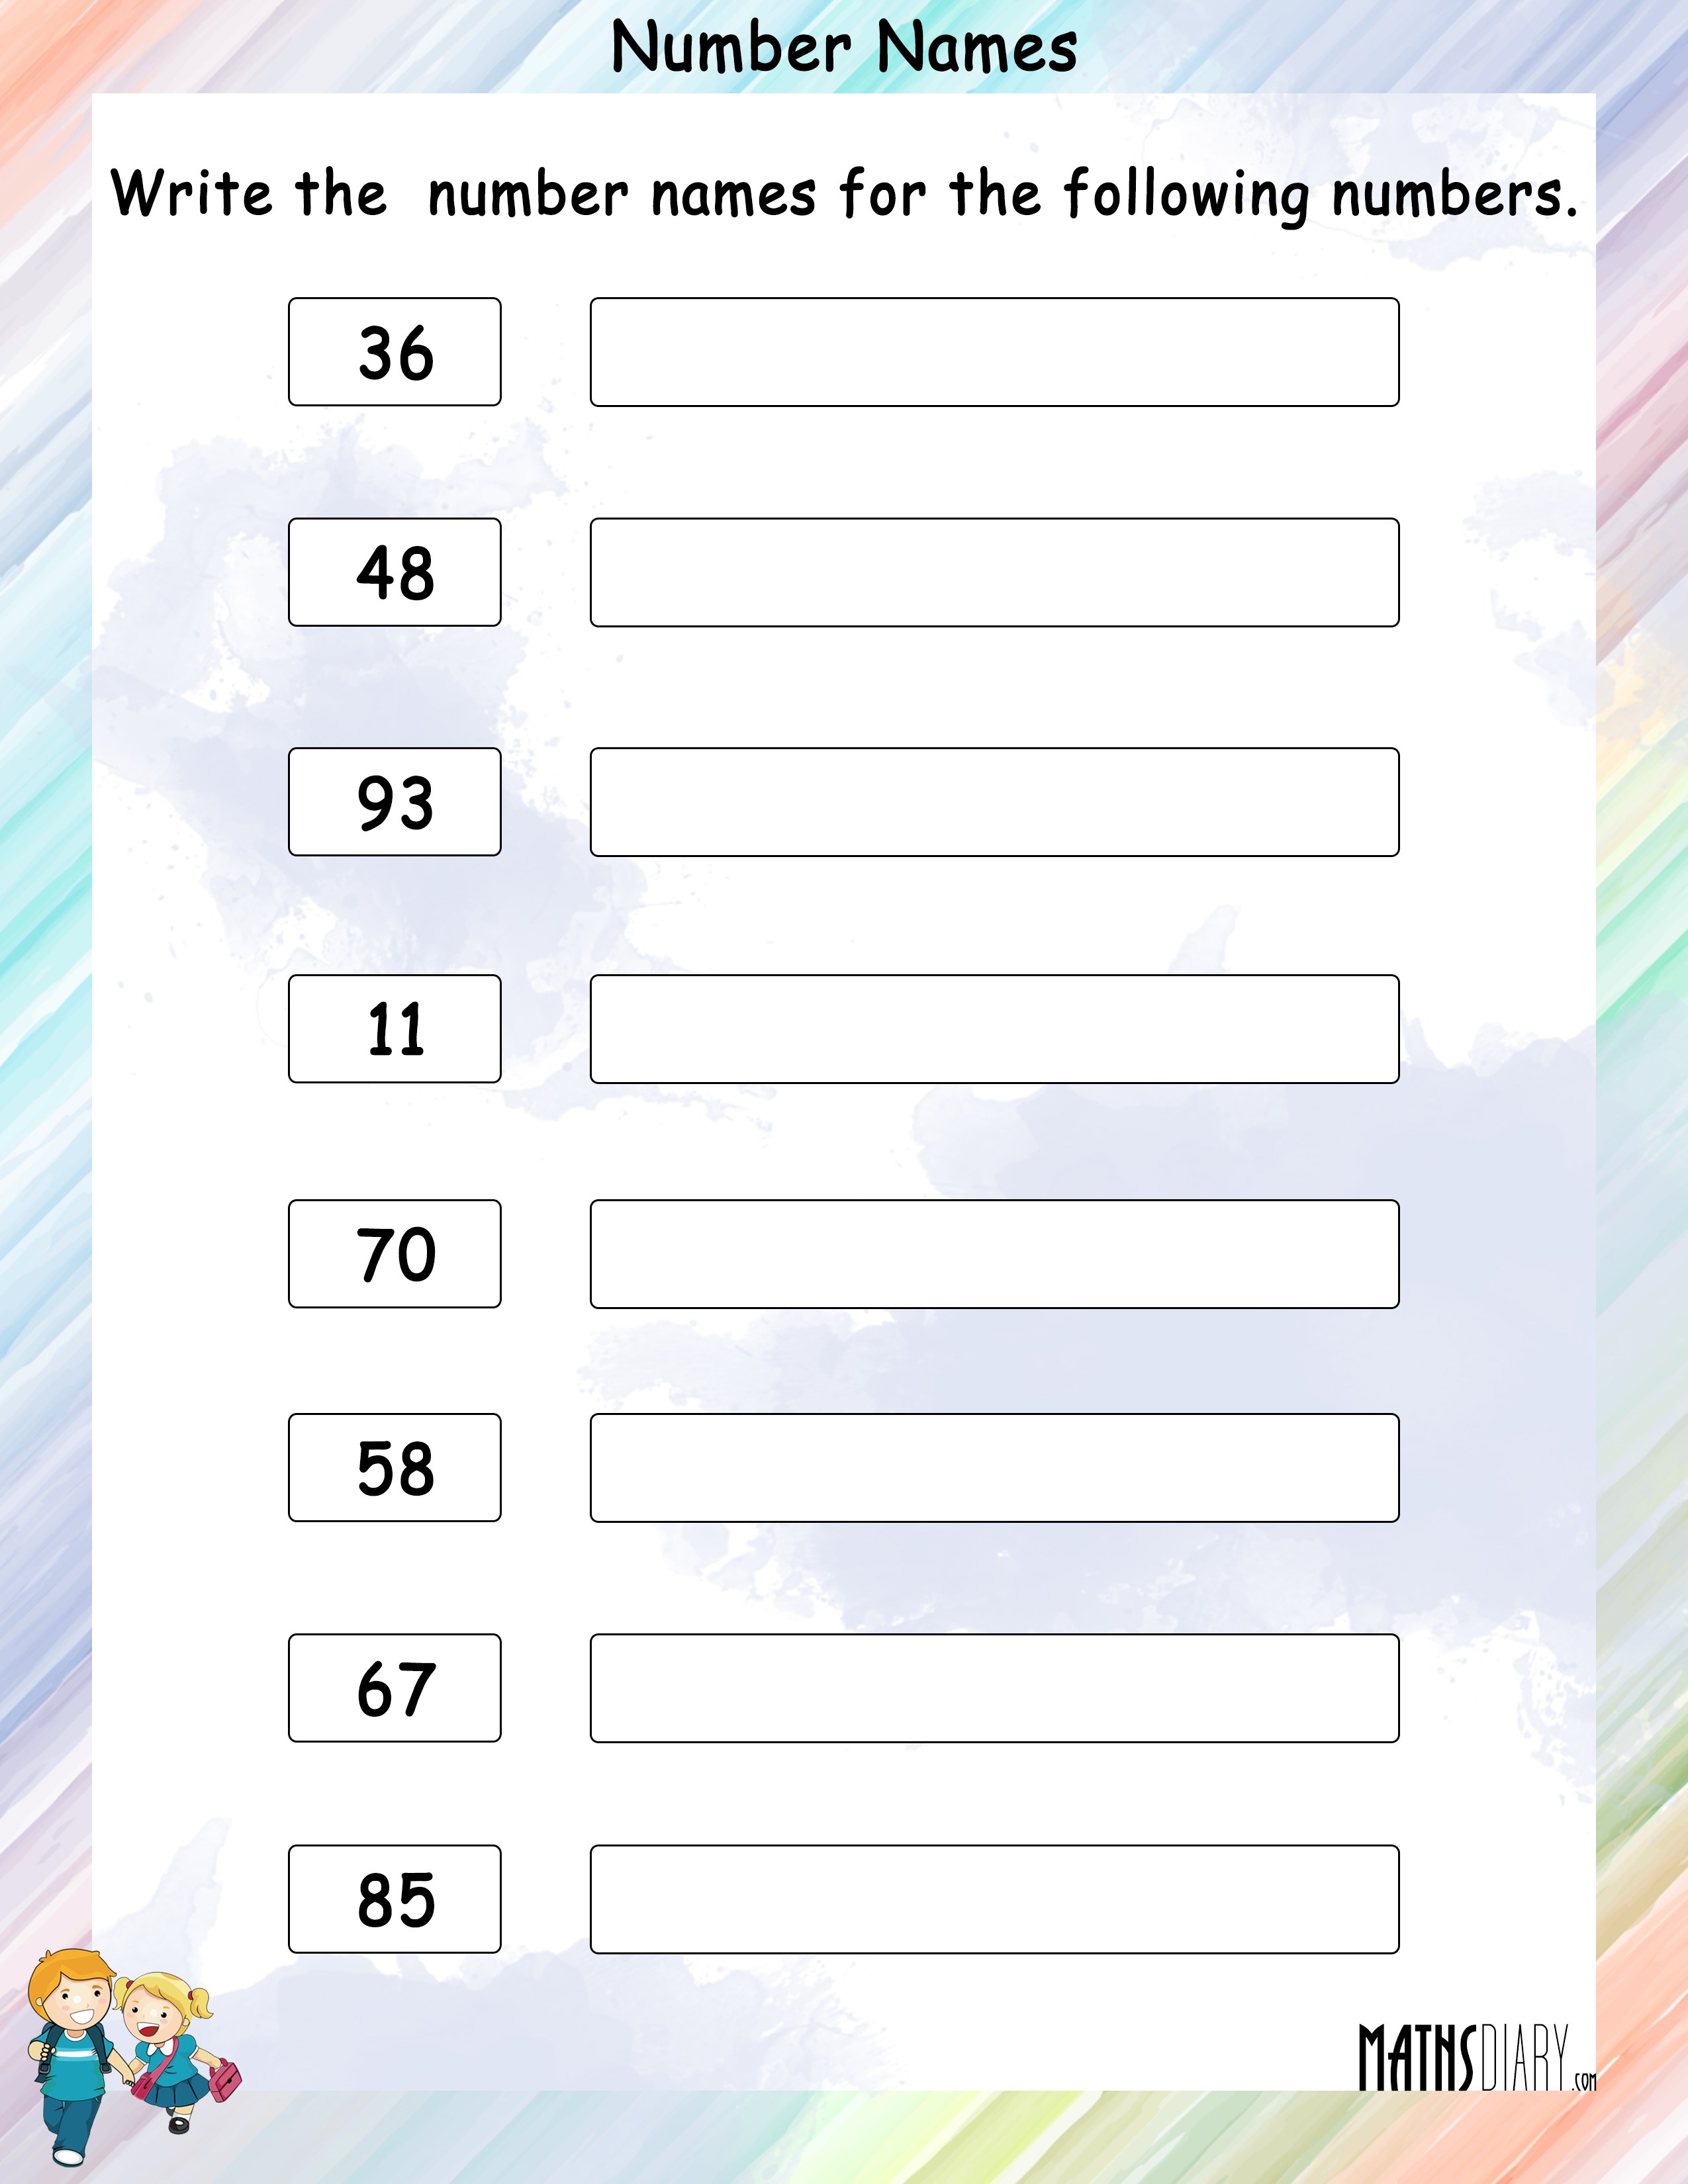 Write number names for given numbers - Math Worksheets - MathsDiary.com